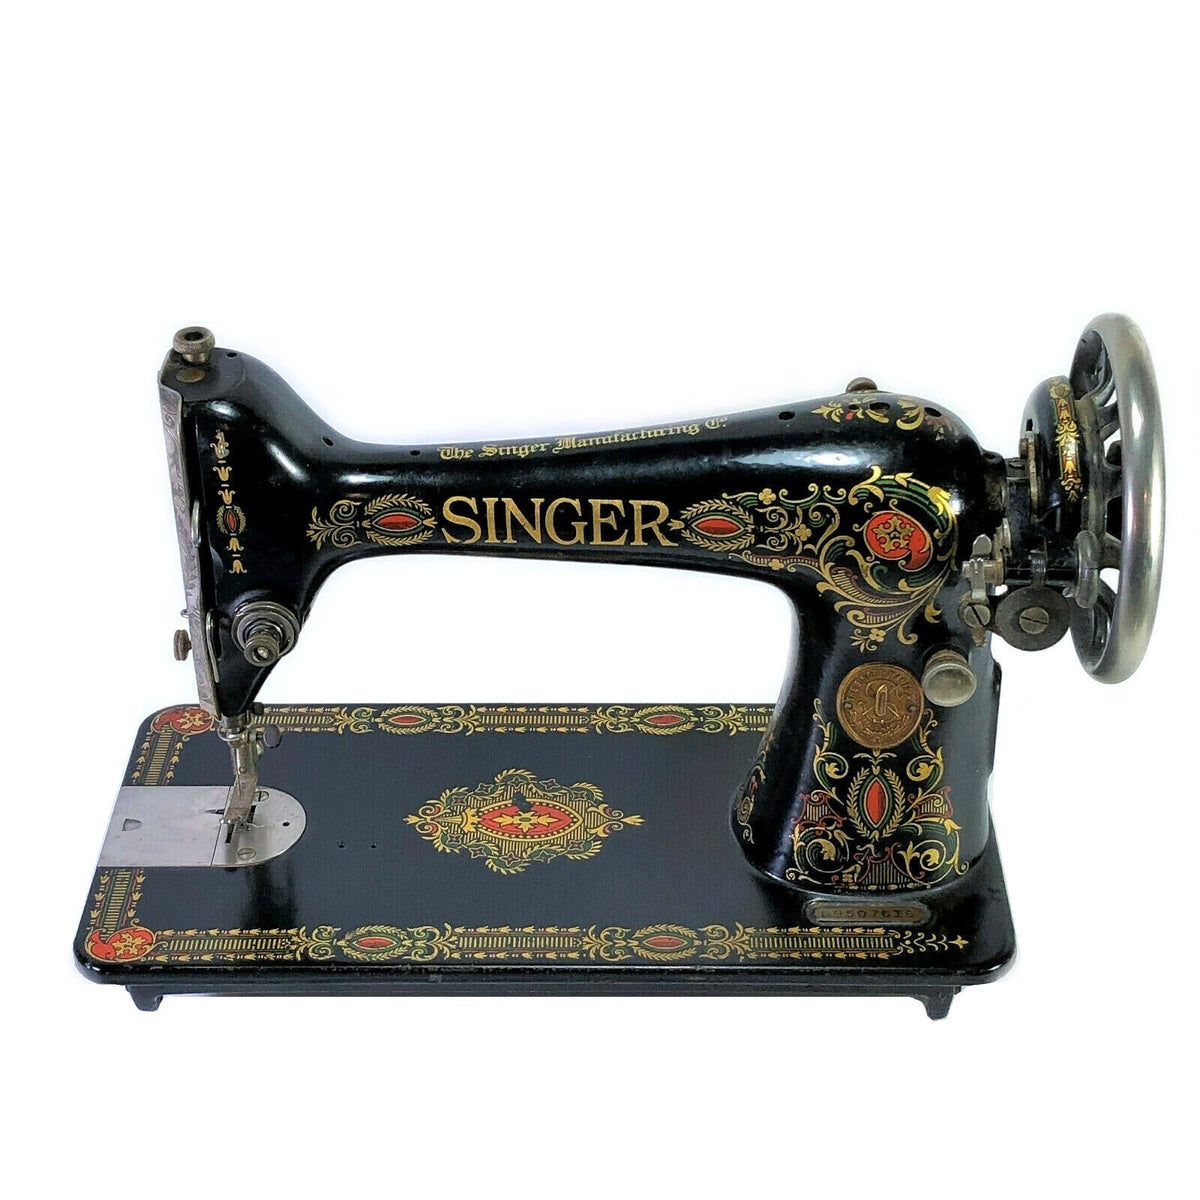 Singer 66 Vintage Sewing Machine: How to Thread the Machine 